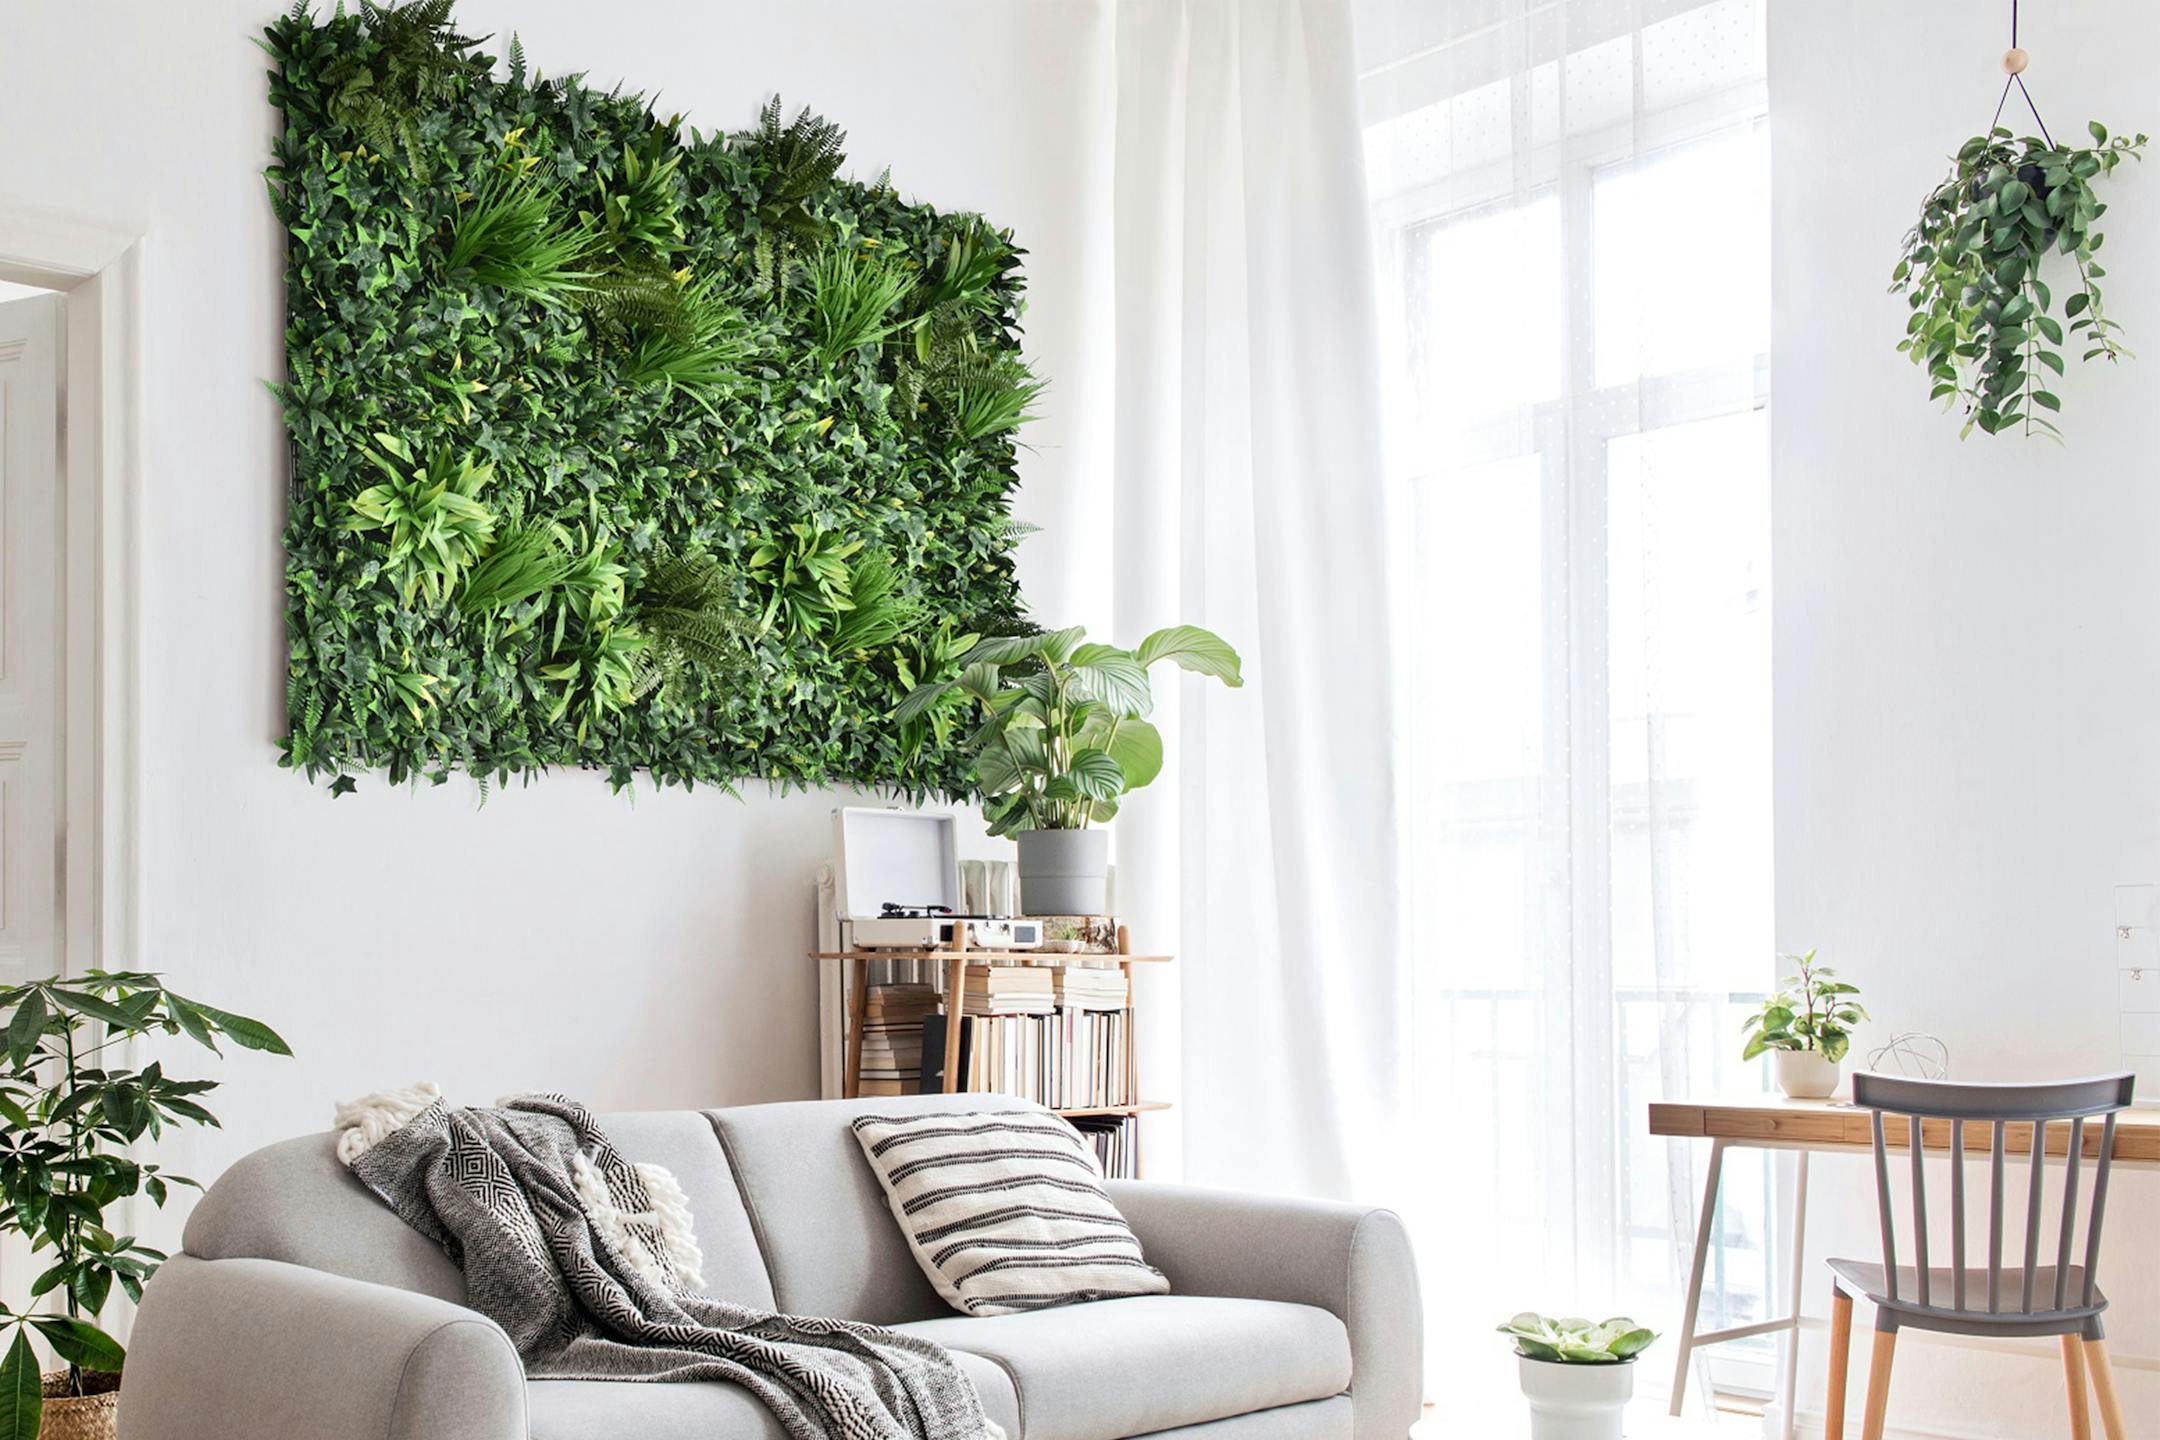 Forest greens green wall panels in living room